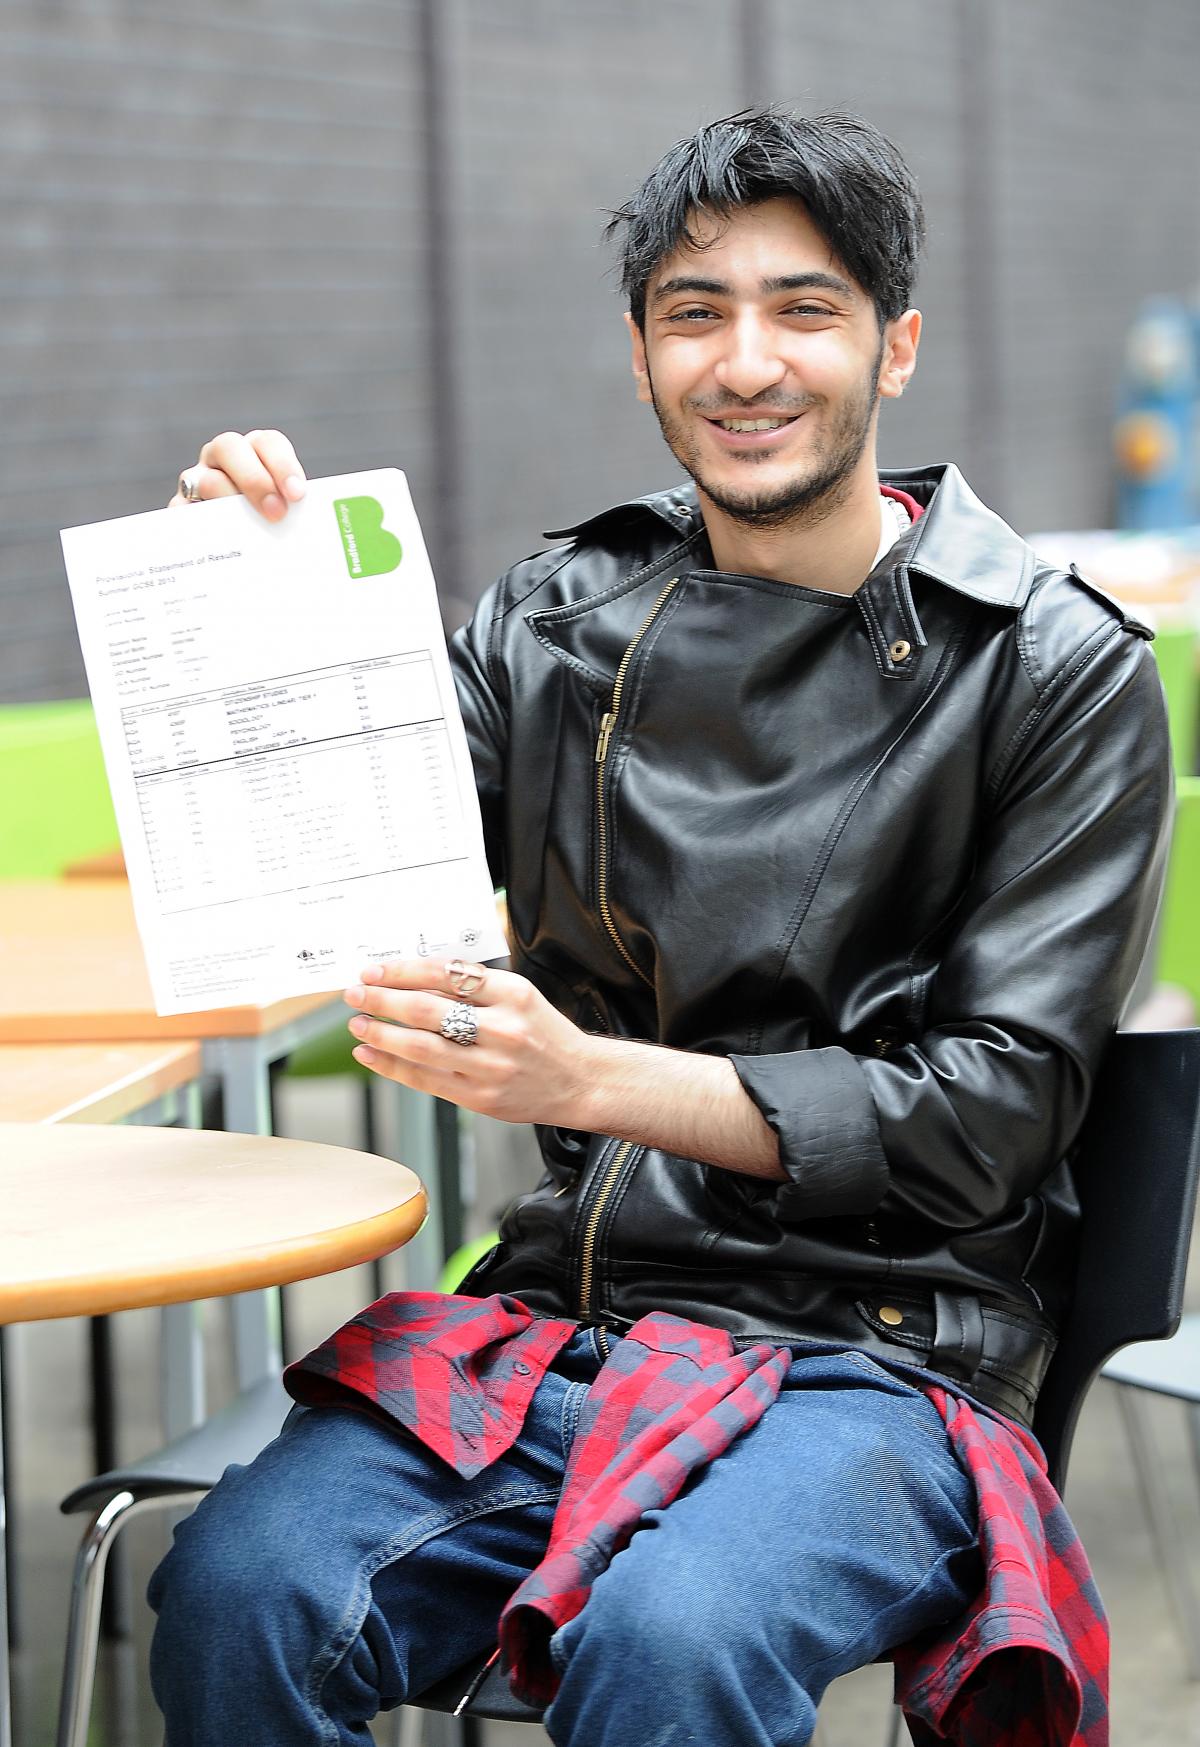 Osman Deen with his GCSE results at Bradford College